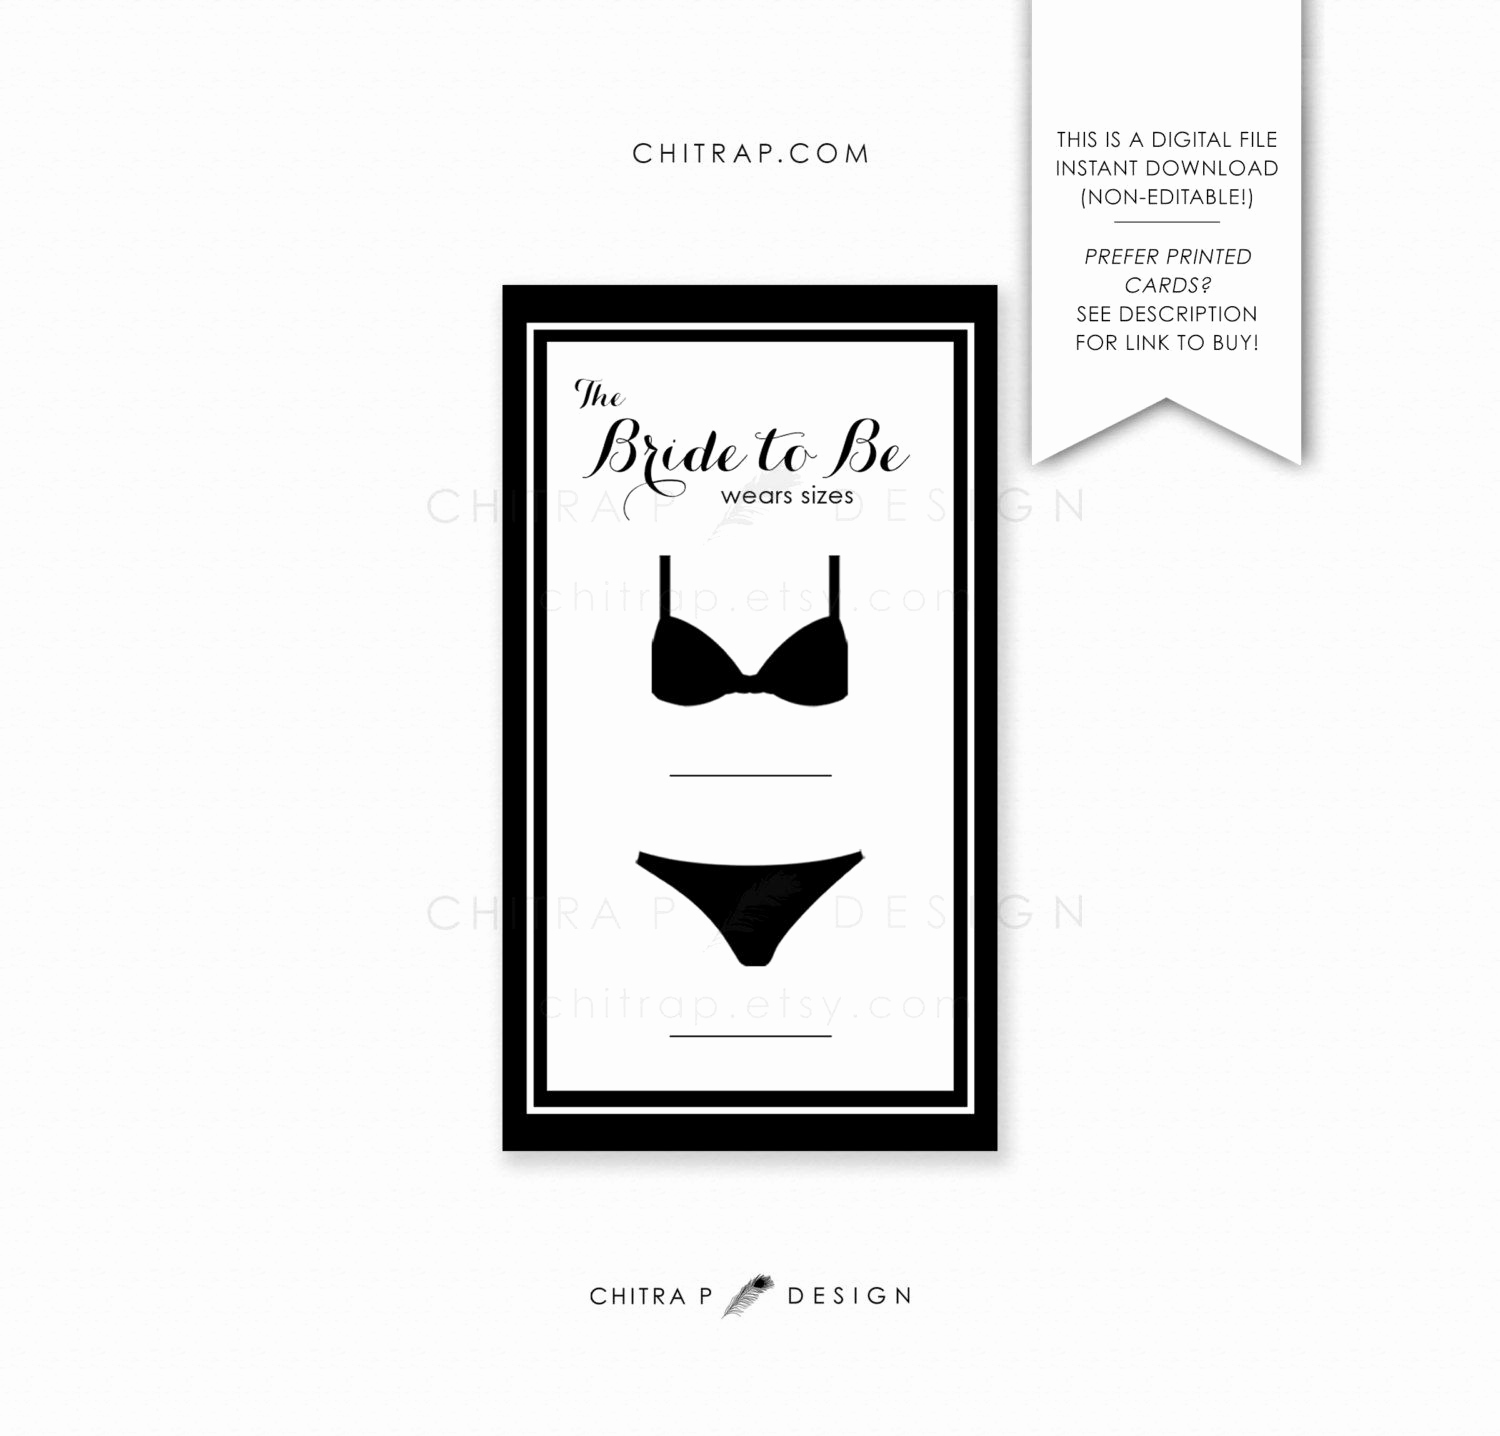 Bridal Shower Invitation Inserts Luxury Lingerie Size Bridal Insert Card Printed or Printable